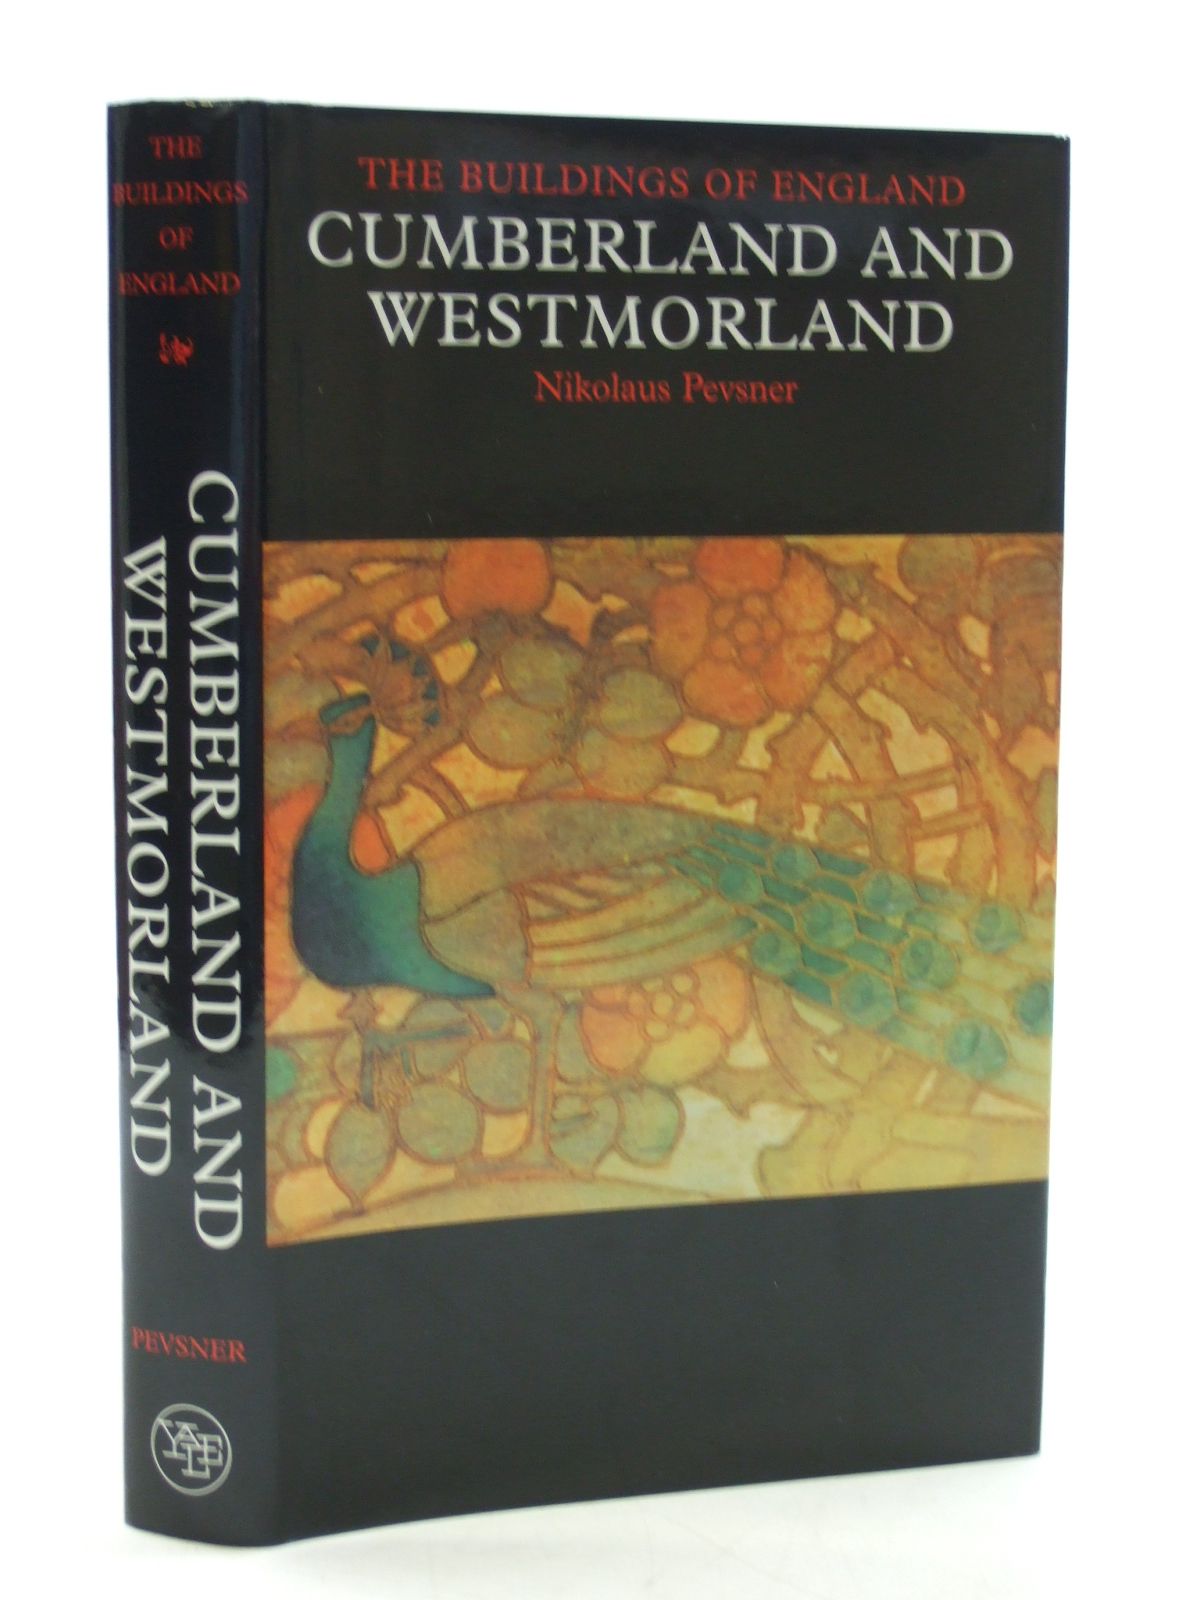 Photo of CUMBERLAND AND WESTMORLAND (BUILDINGS OF ENGLAND) written by Pevsner, Nikolaus published by Yale University Press (STOCK CODE: 1604539)  for sale by Stella & Rose's Books